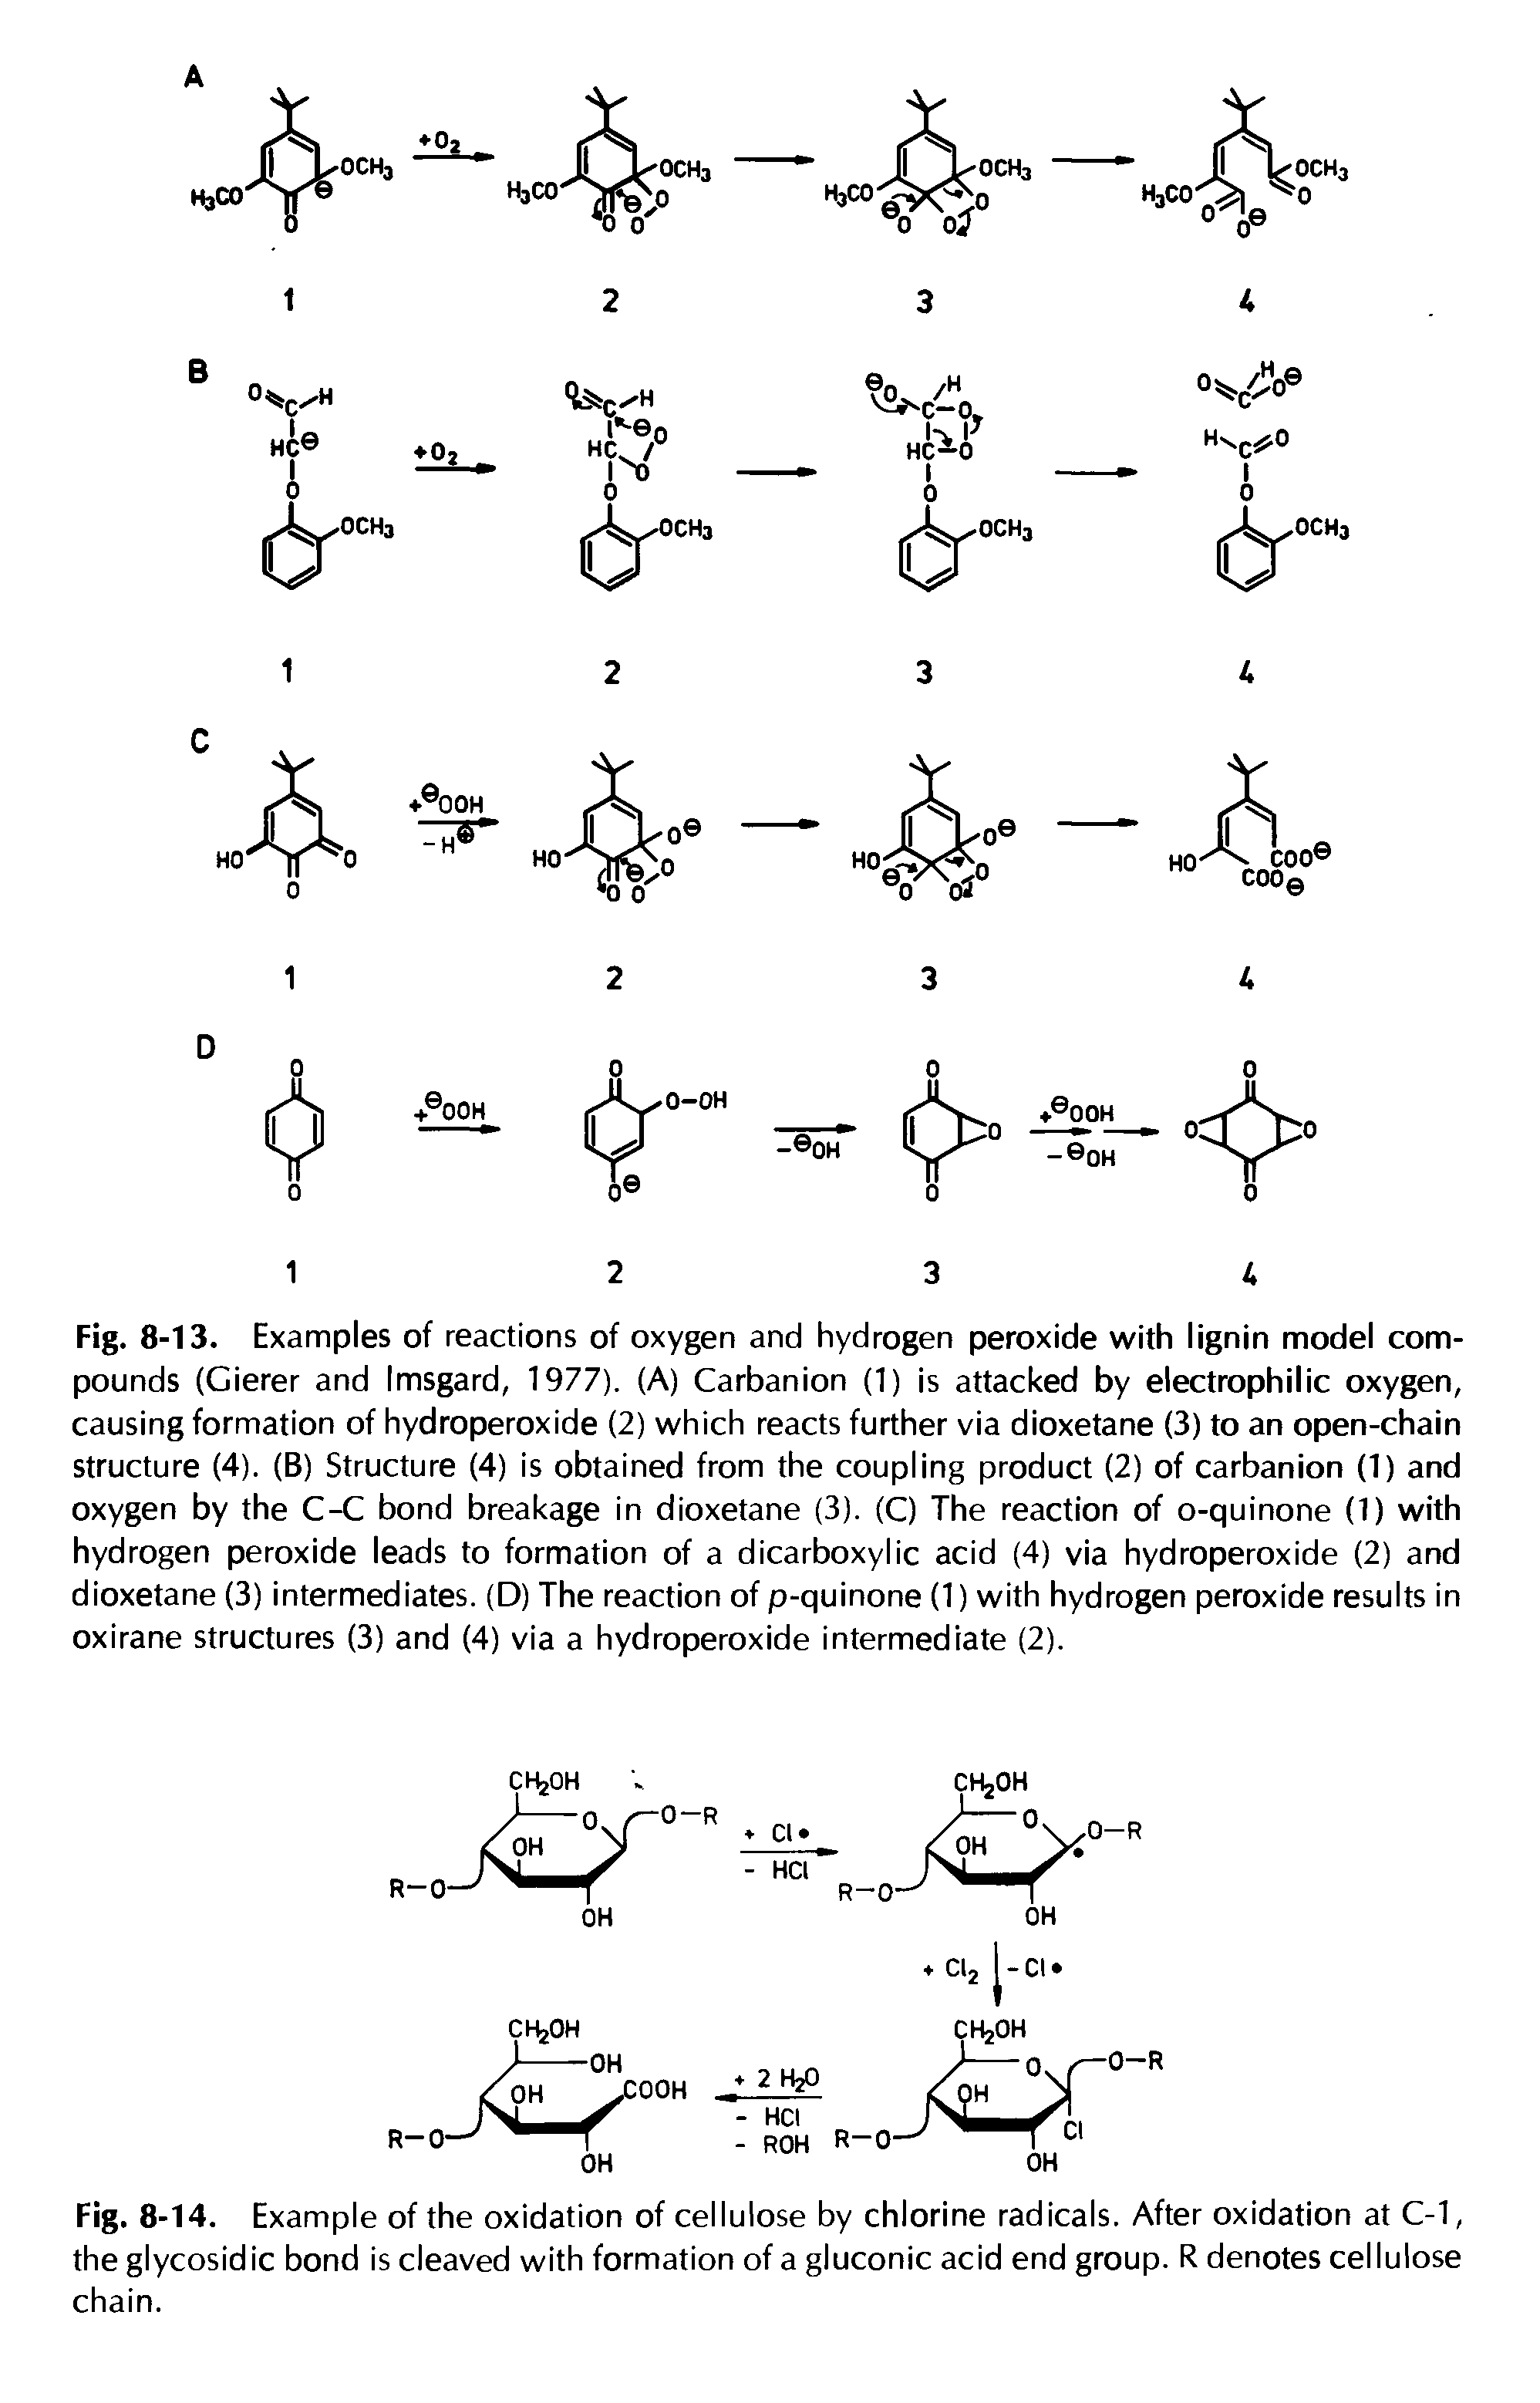 Fig. 8-14. Example of the oxidation of cellulose by chlorine radicals. After oxidation at C-1, the glycosidic bond is cleaved with formation of a gluconic acid end group. R denotes cellulose chain.